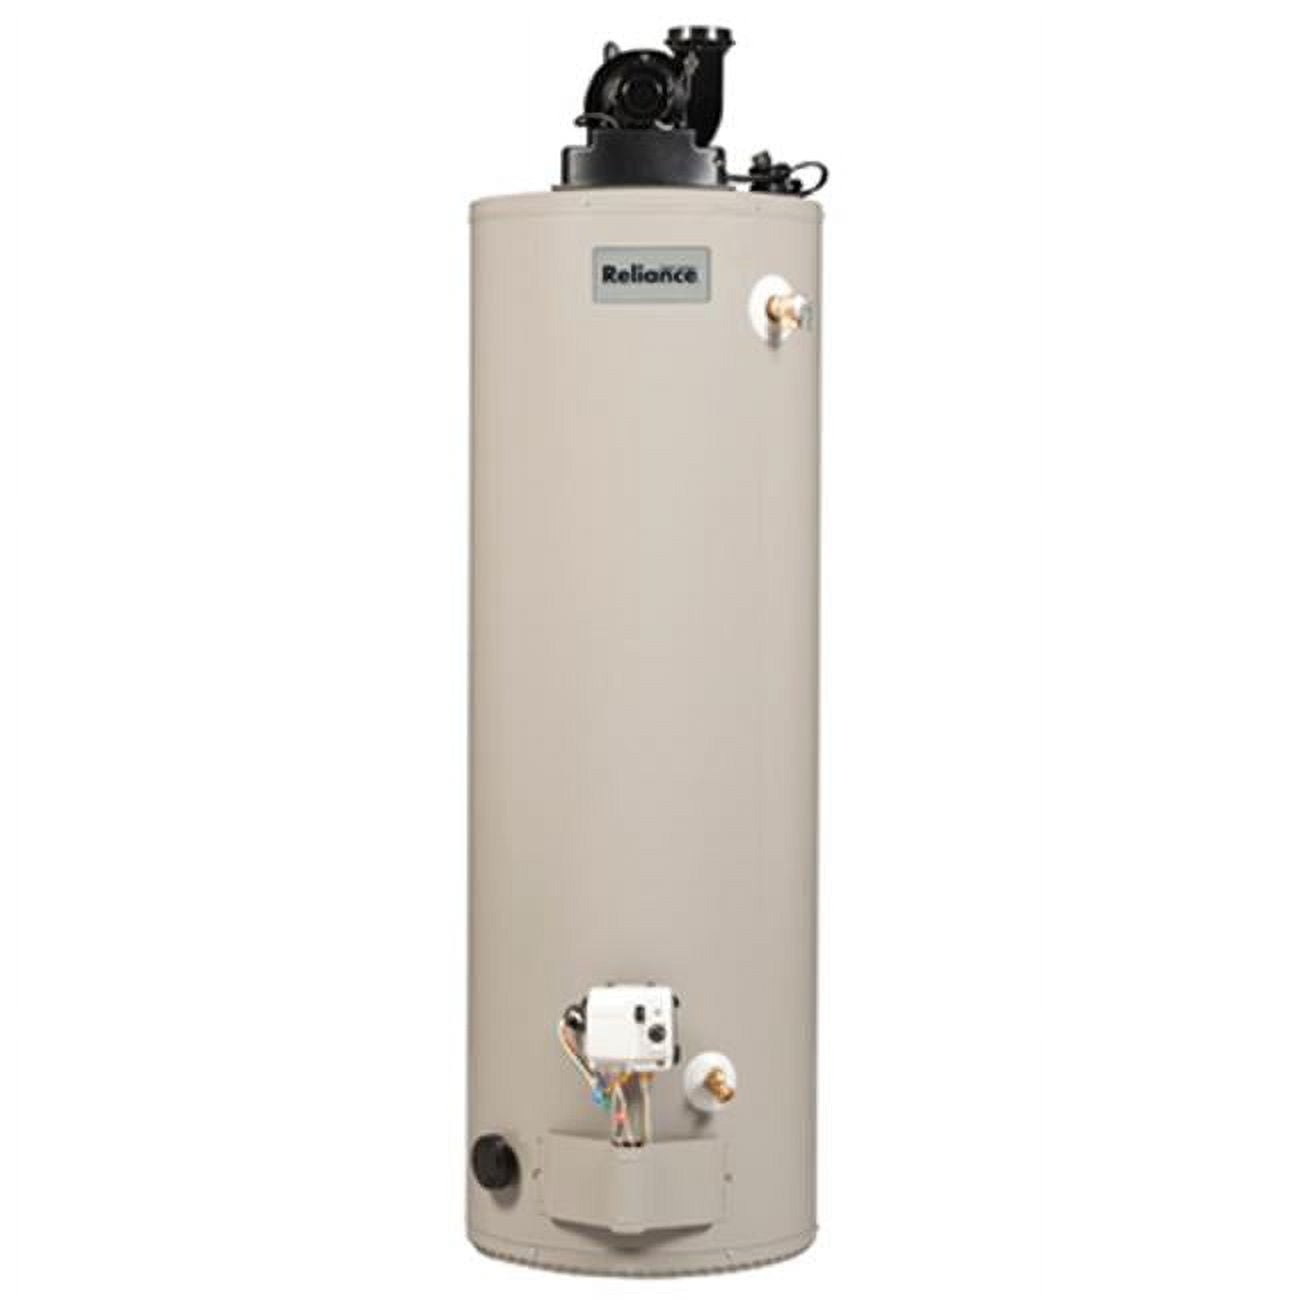 IPS Water Heater Stand 24 in. x 24 in. x 18 in. 1200 lb Limit 83181